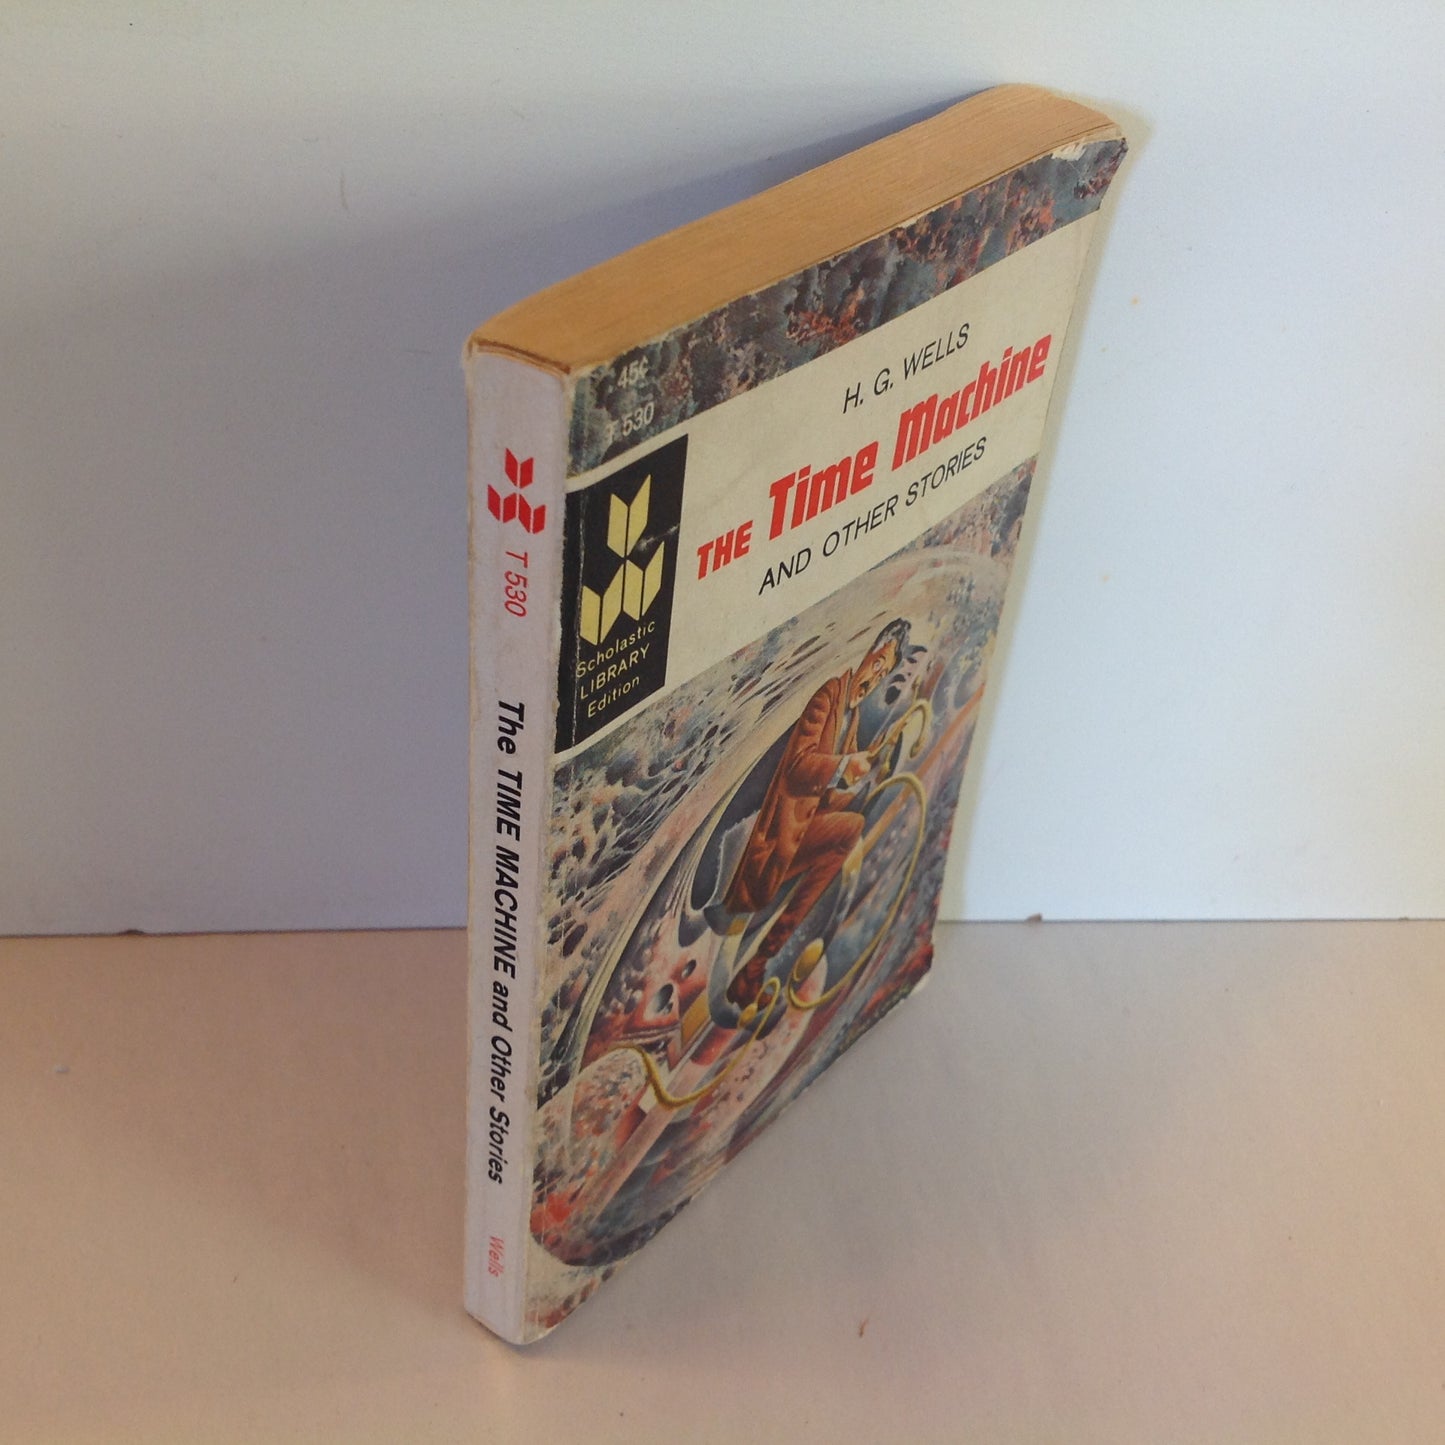 Vintage 1968 Mass Market Paperback The Time Machine and Other Stories H. G. Wells